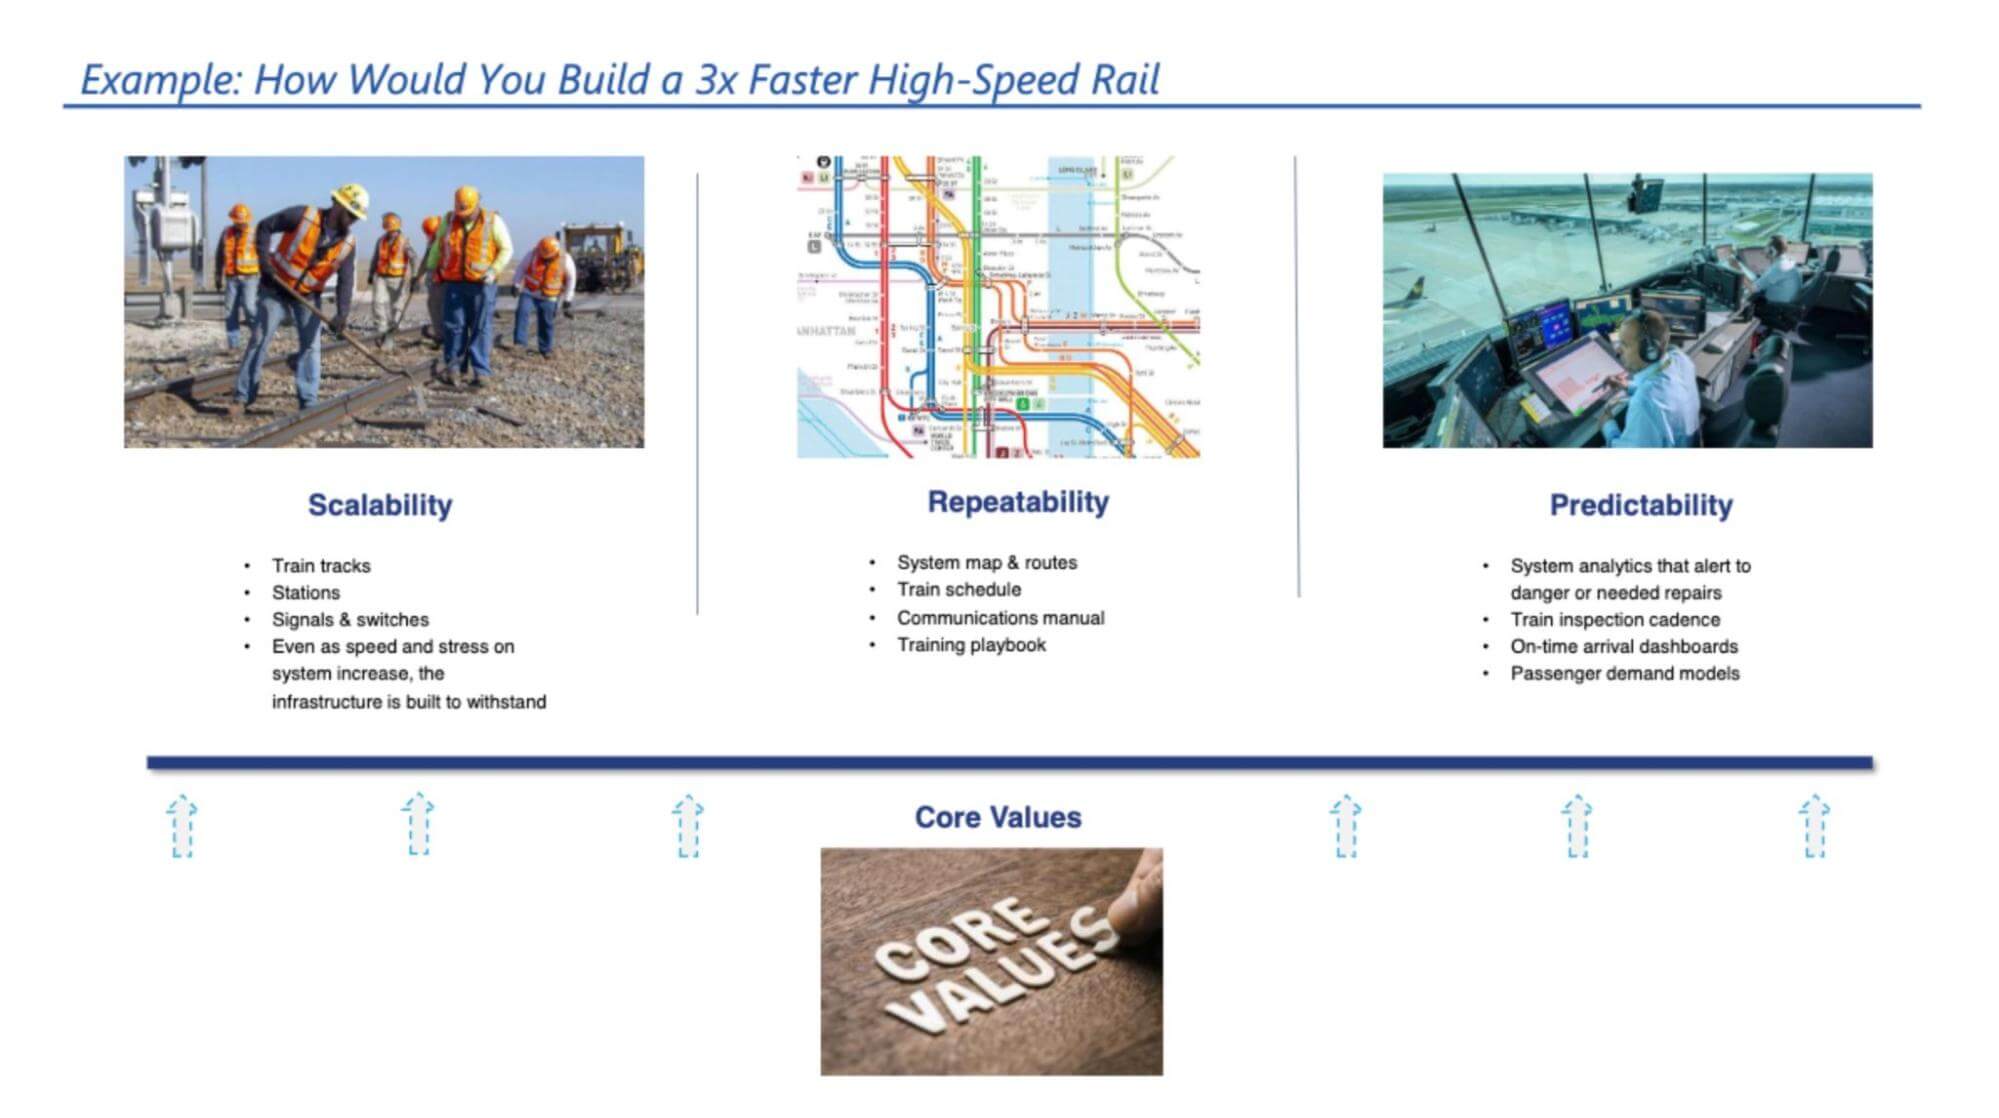 Example: how would you build a 3x faster high speed rail? Scalability, repeatability, predictability